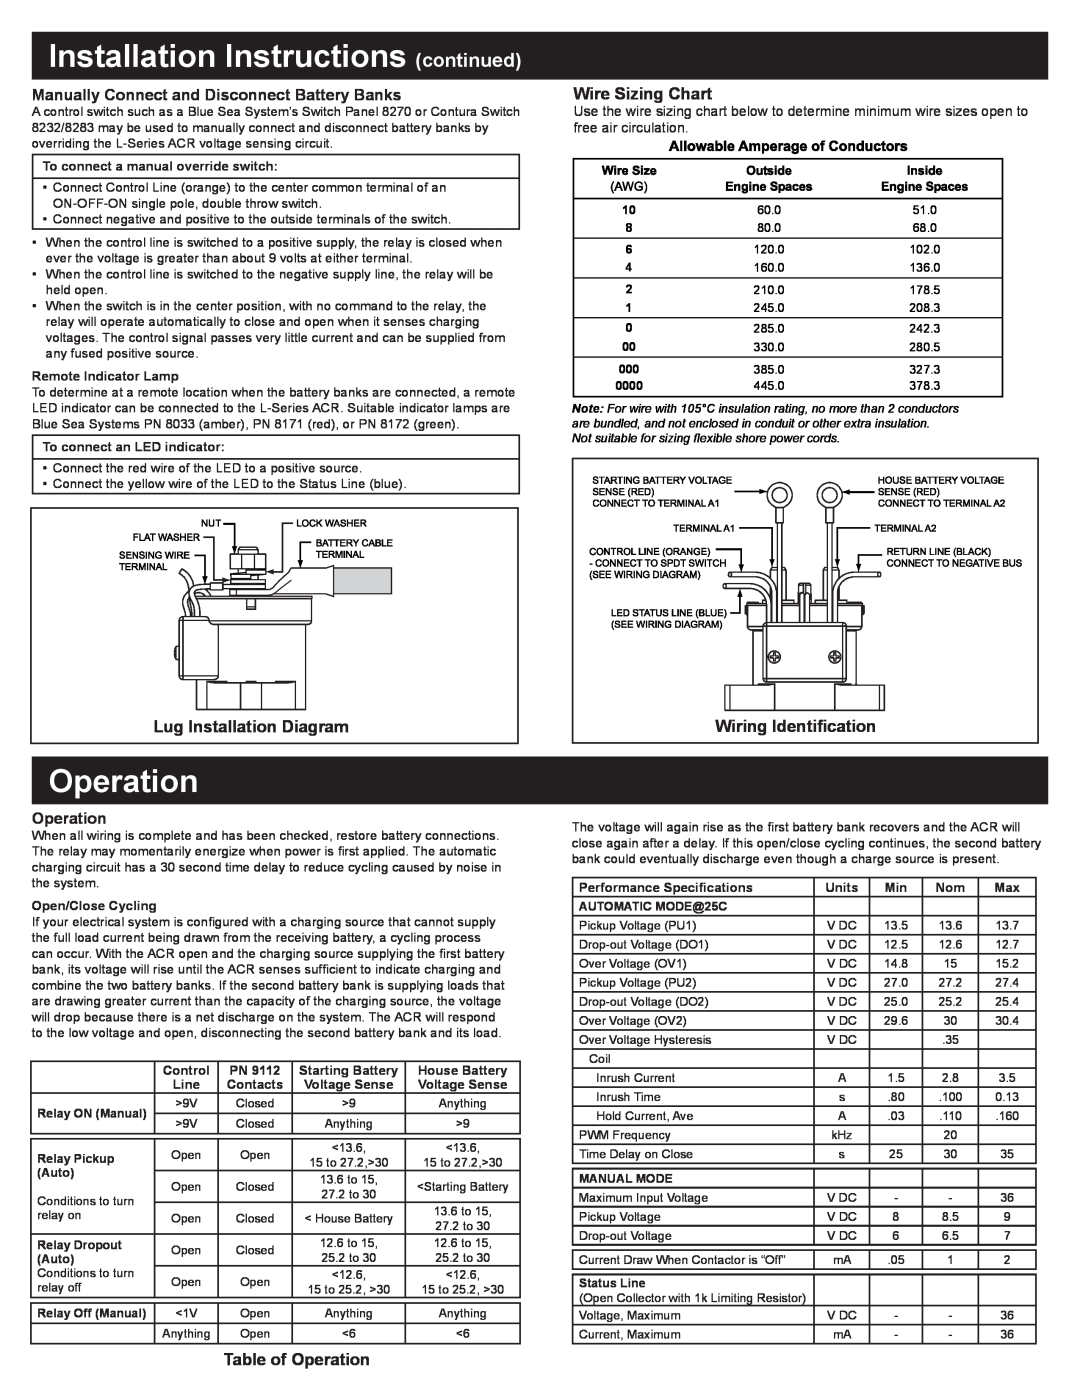 Blue Sea Systems PN9112 Installation Instructions continued, Operation, Lug Installation Diagram, Wire Sizing Chart 